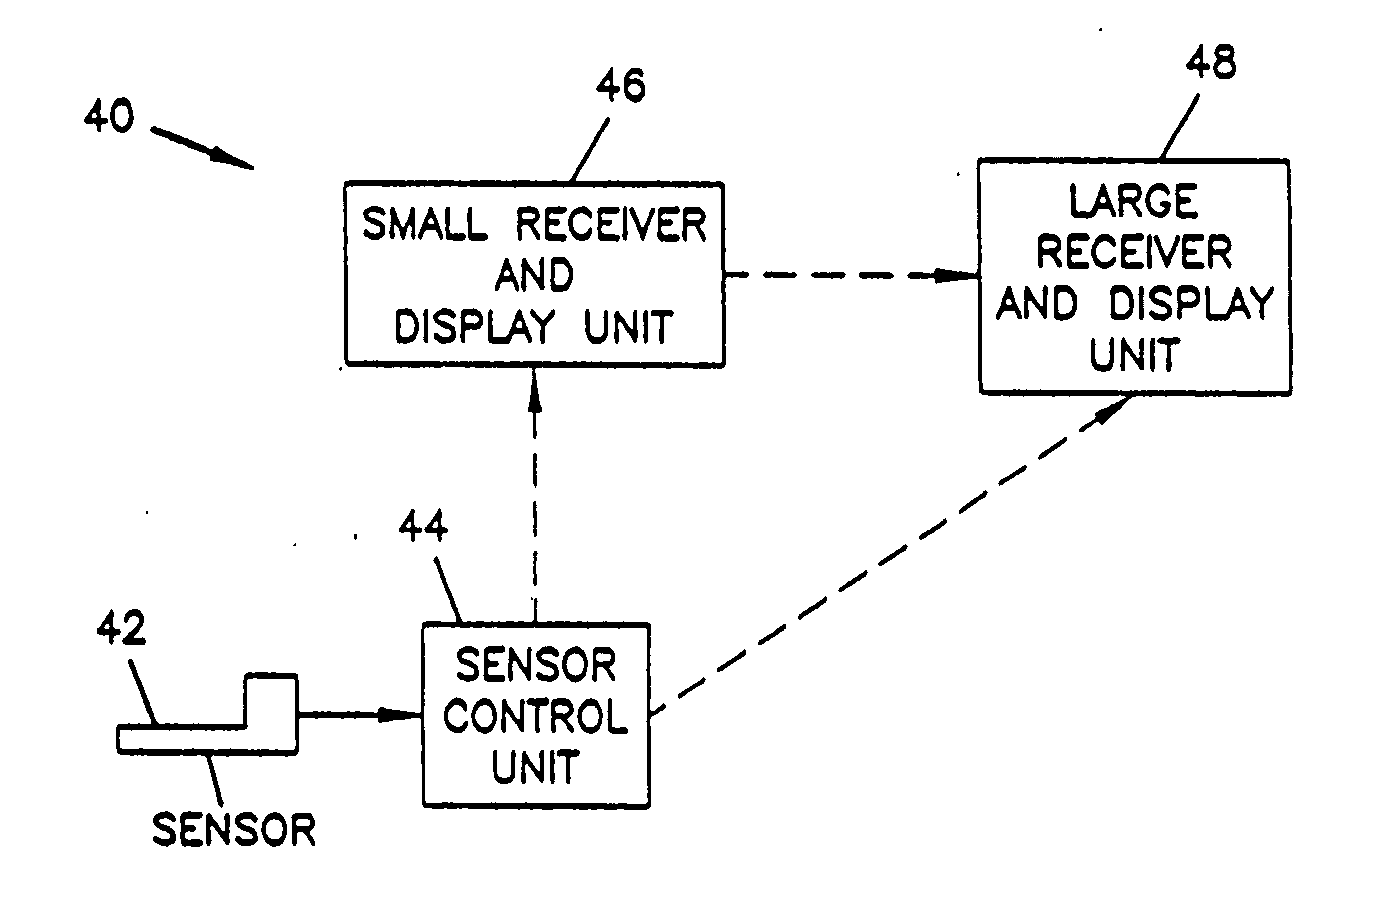 Analyte monitoring device and methods of use